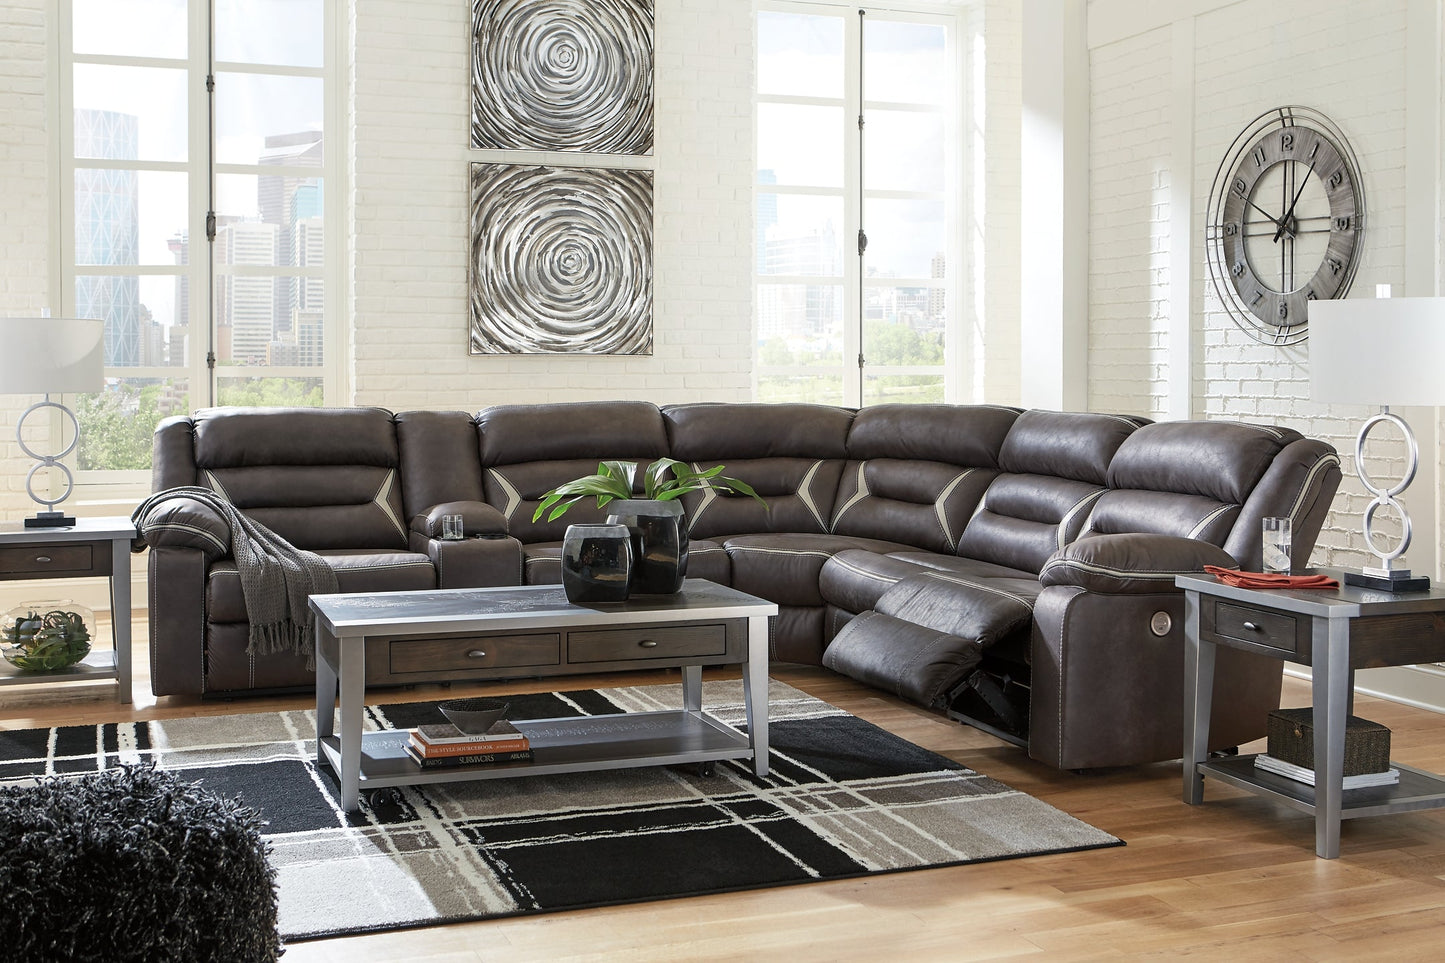 Kincord 4-Piece Sectional with Recliner Smyrna Furniture Outlet